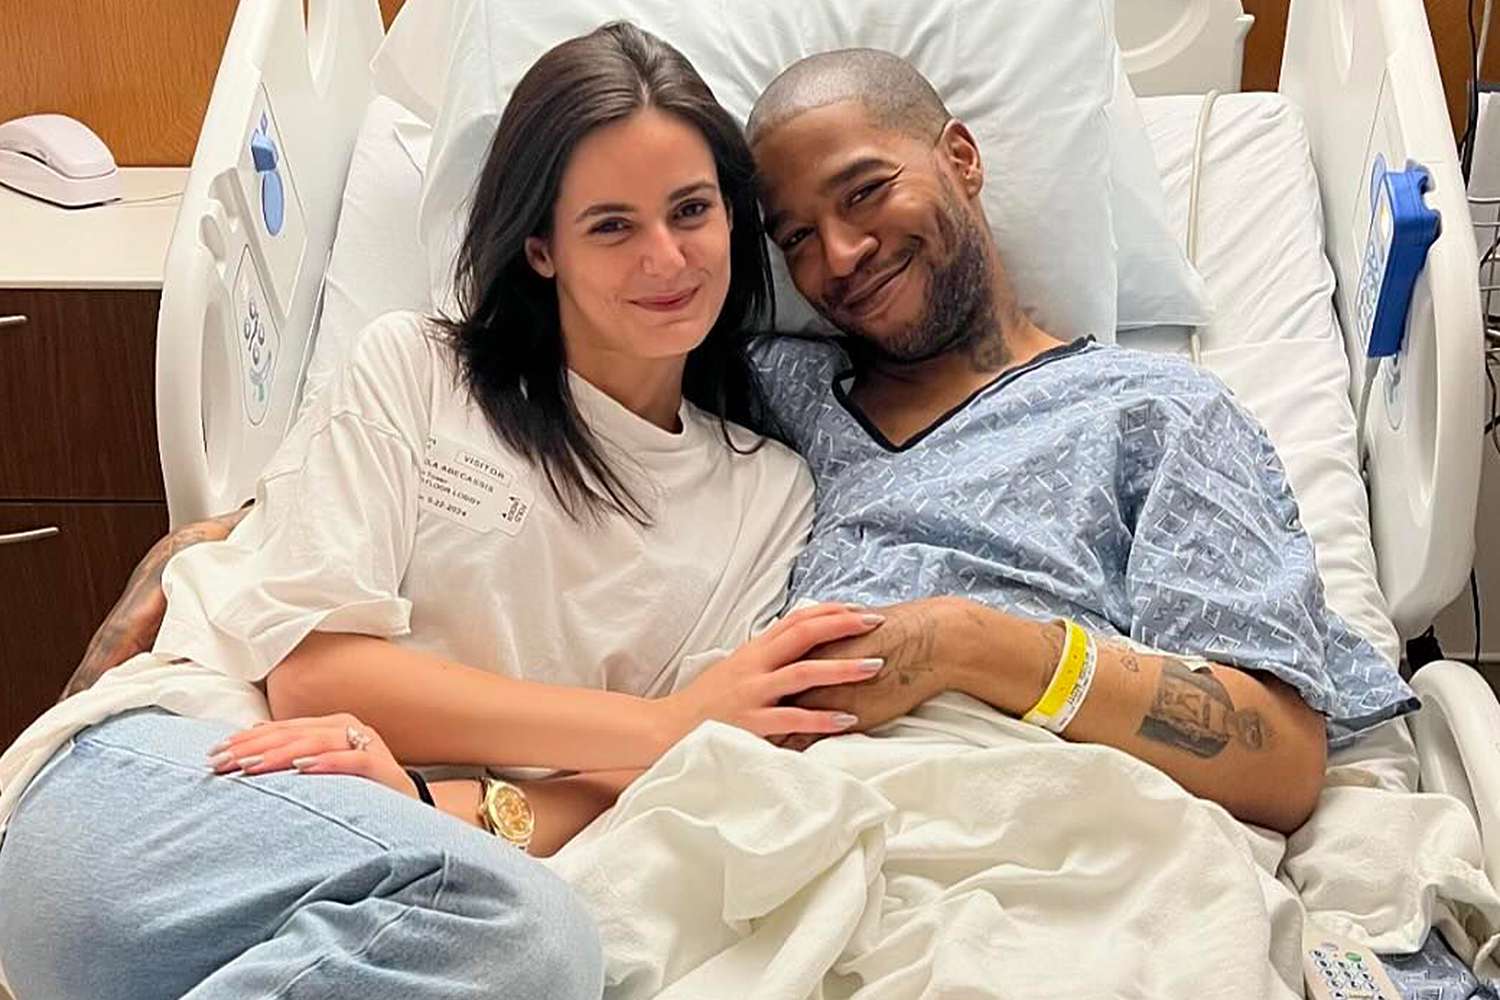 Kid Cudi Posts Update from Hospital with Fiancée After Second Foot Surgery: 'Feelin Goood Man!!'